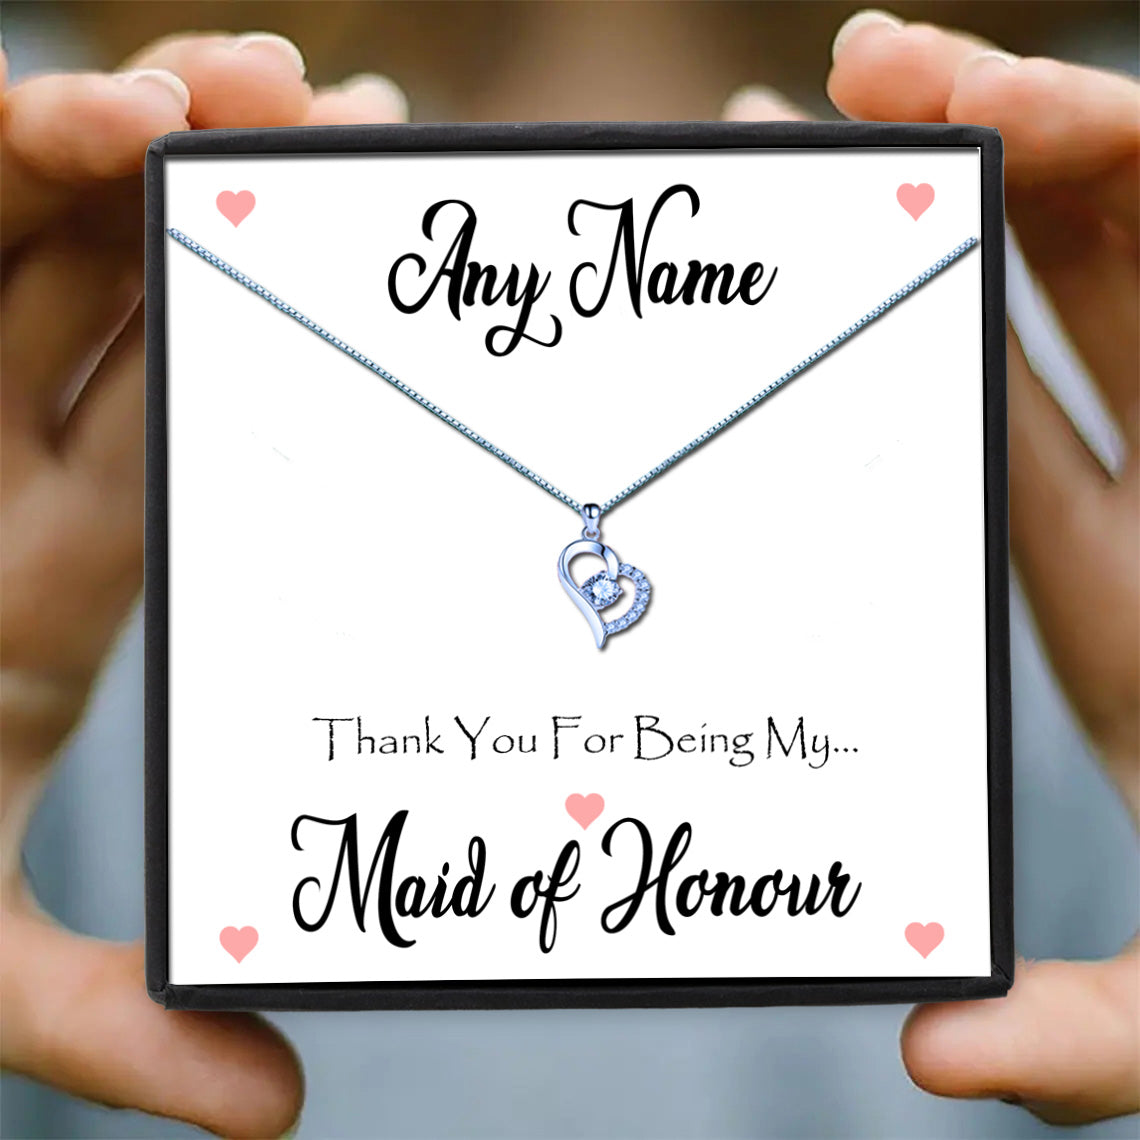 Thank you Maid of Honour Personalised Necklaces